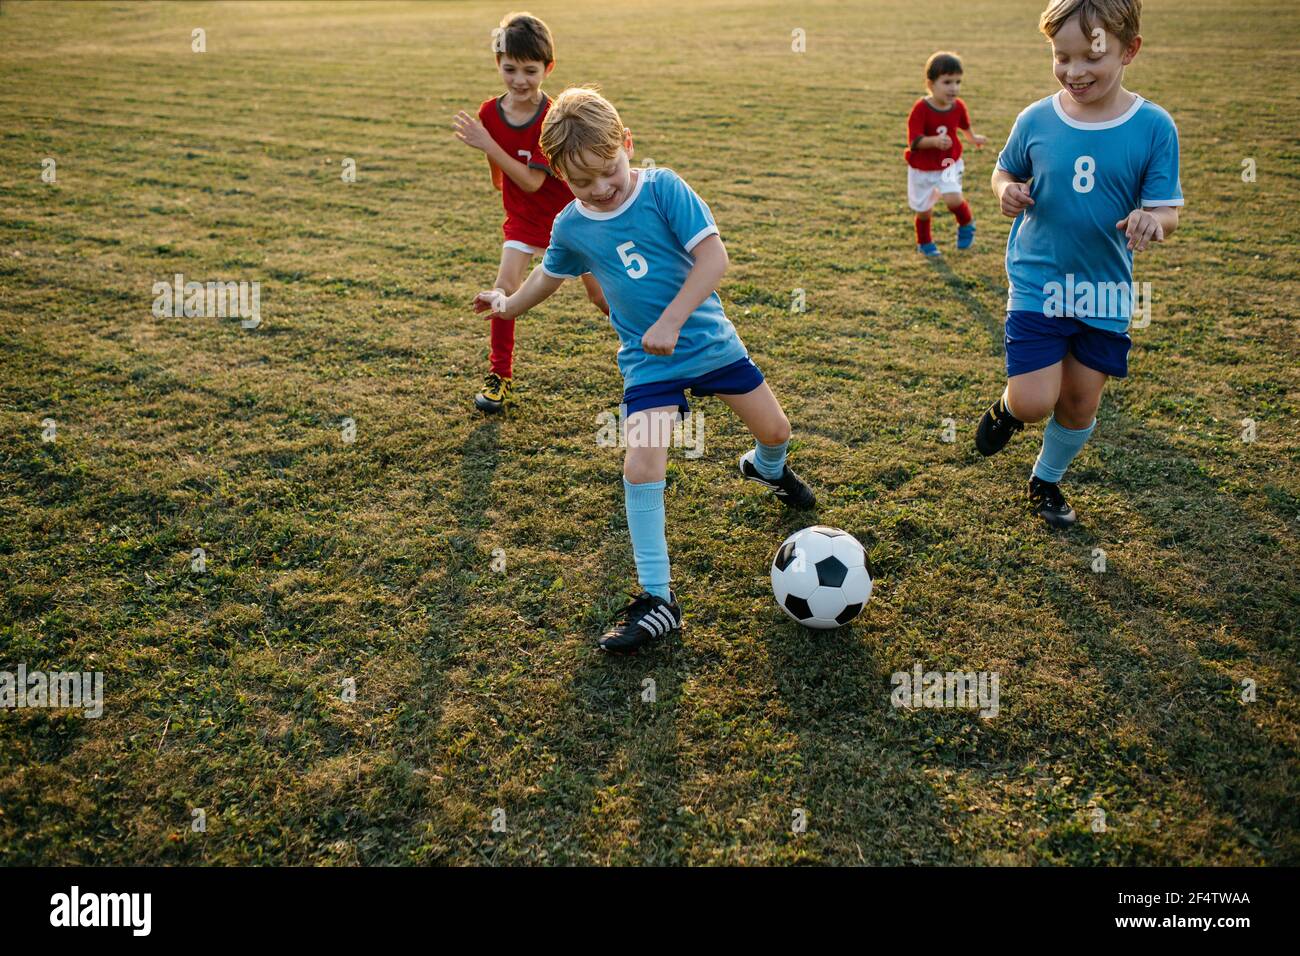 Children playing amateur soccer. Cheerful boys running after football ball outside on pitch at sunset. Stock Photo